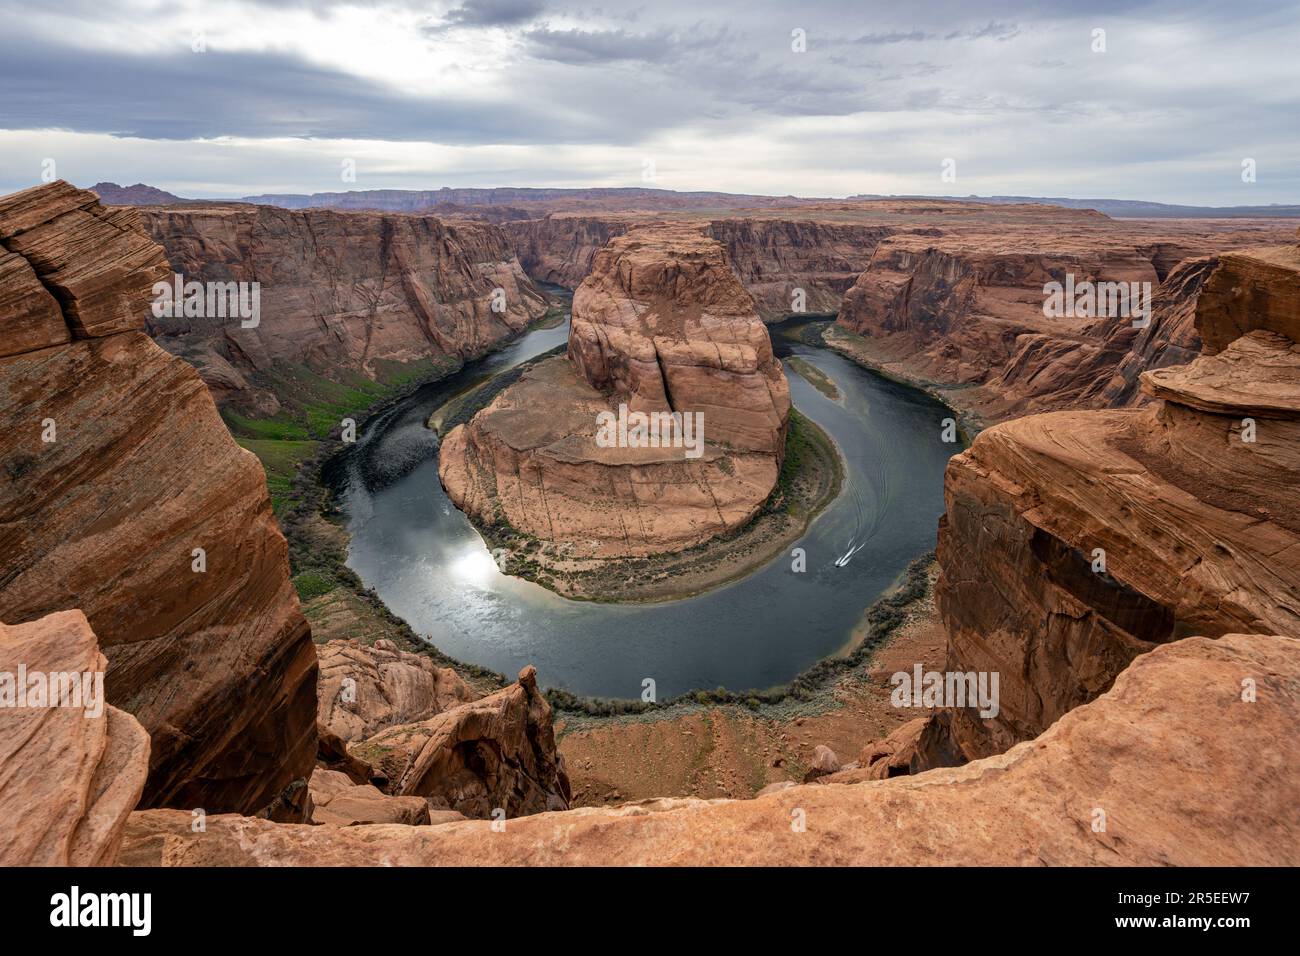 The amazing Horseshoe Bend of the Colorado river in northern Arizona Stock Photo